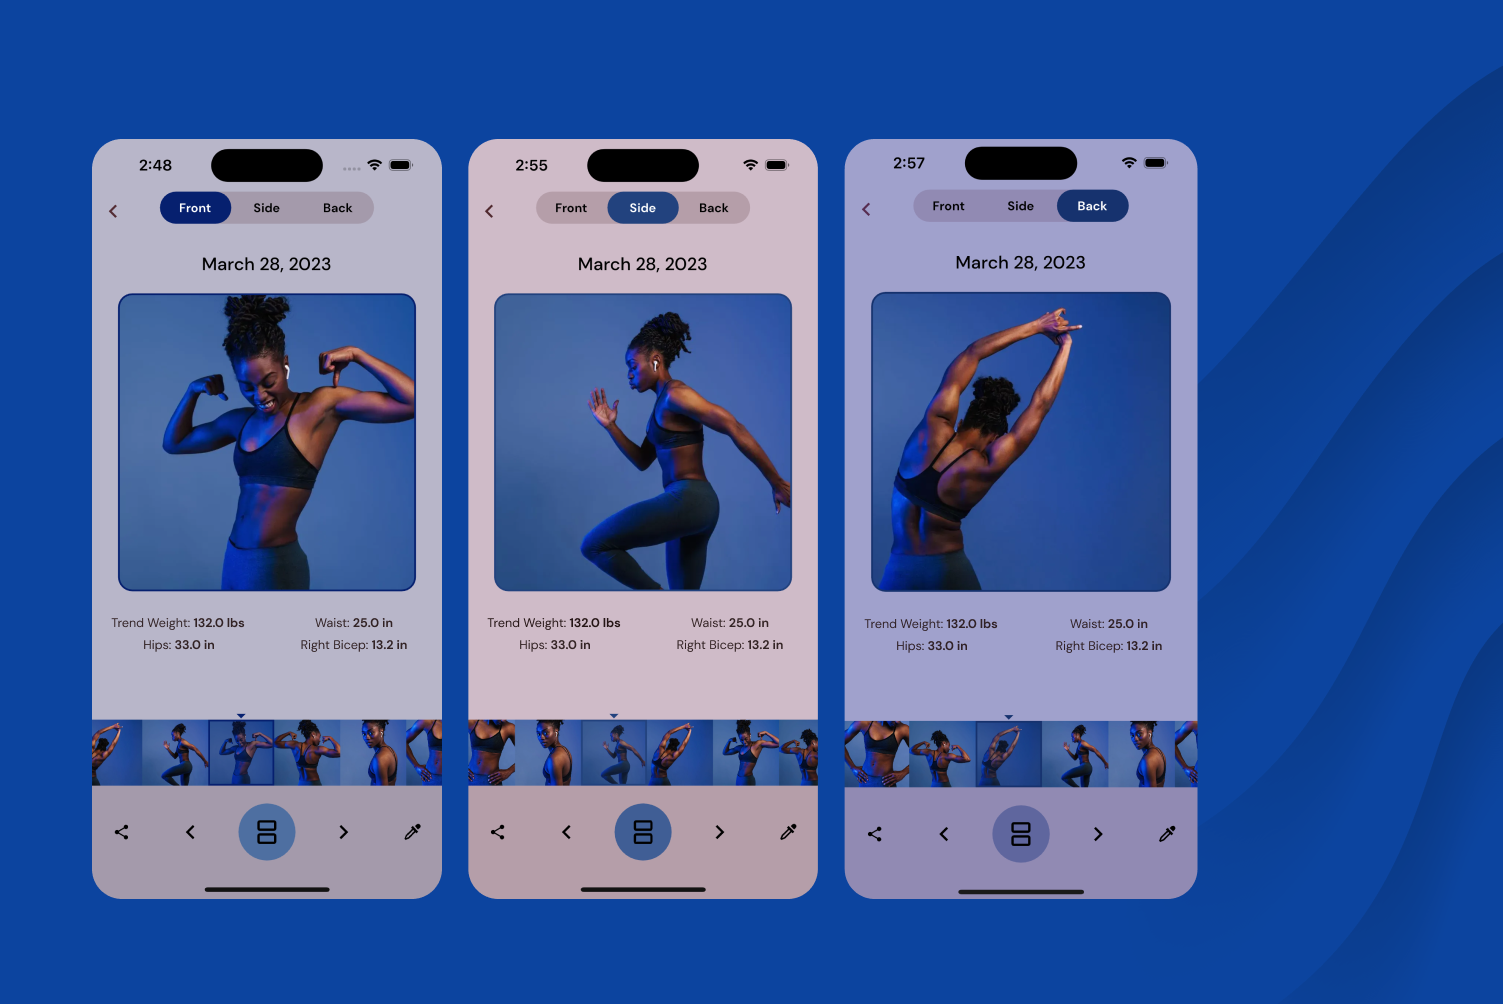 Progress photos and body measurement tracking in-app